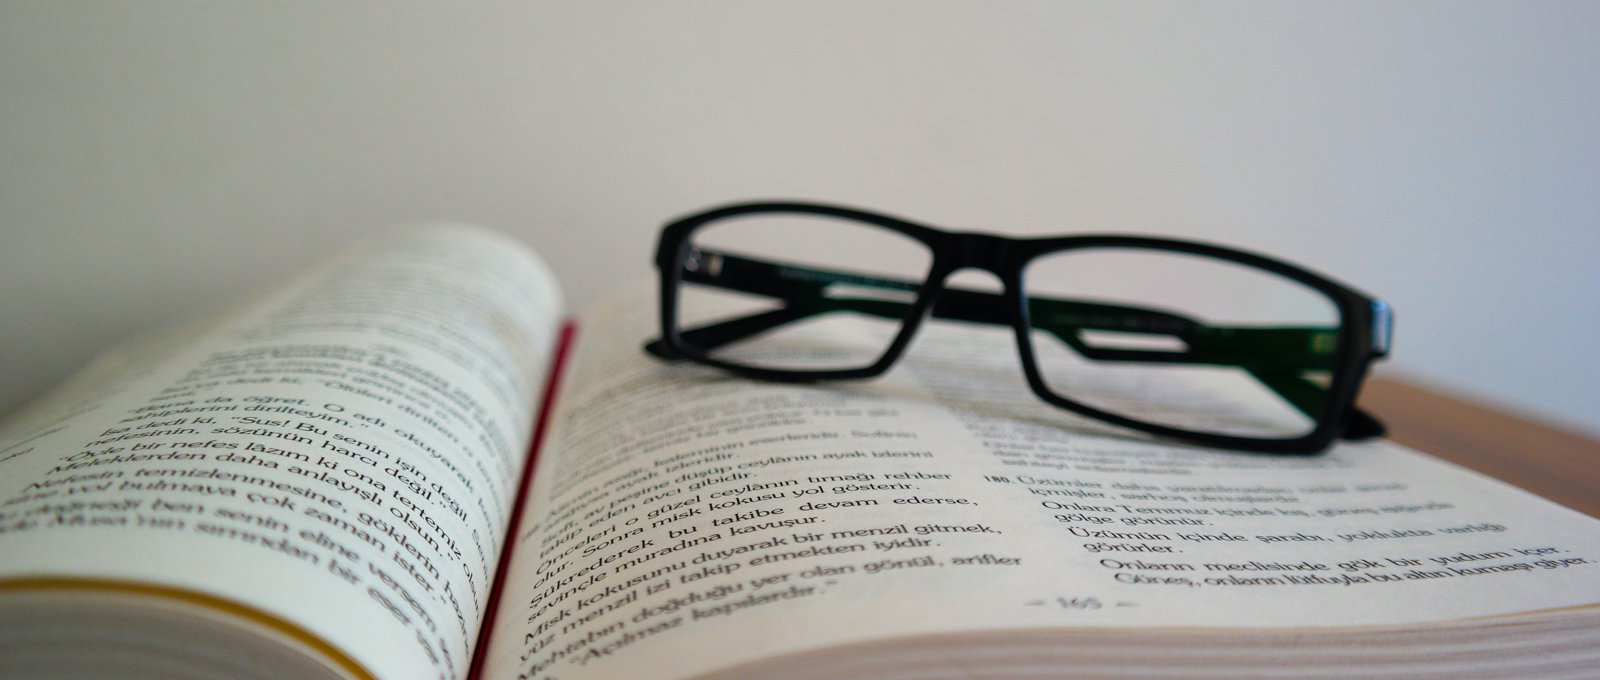 A pair of black glasses sat on top of an open book.